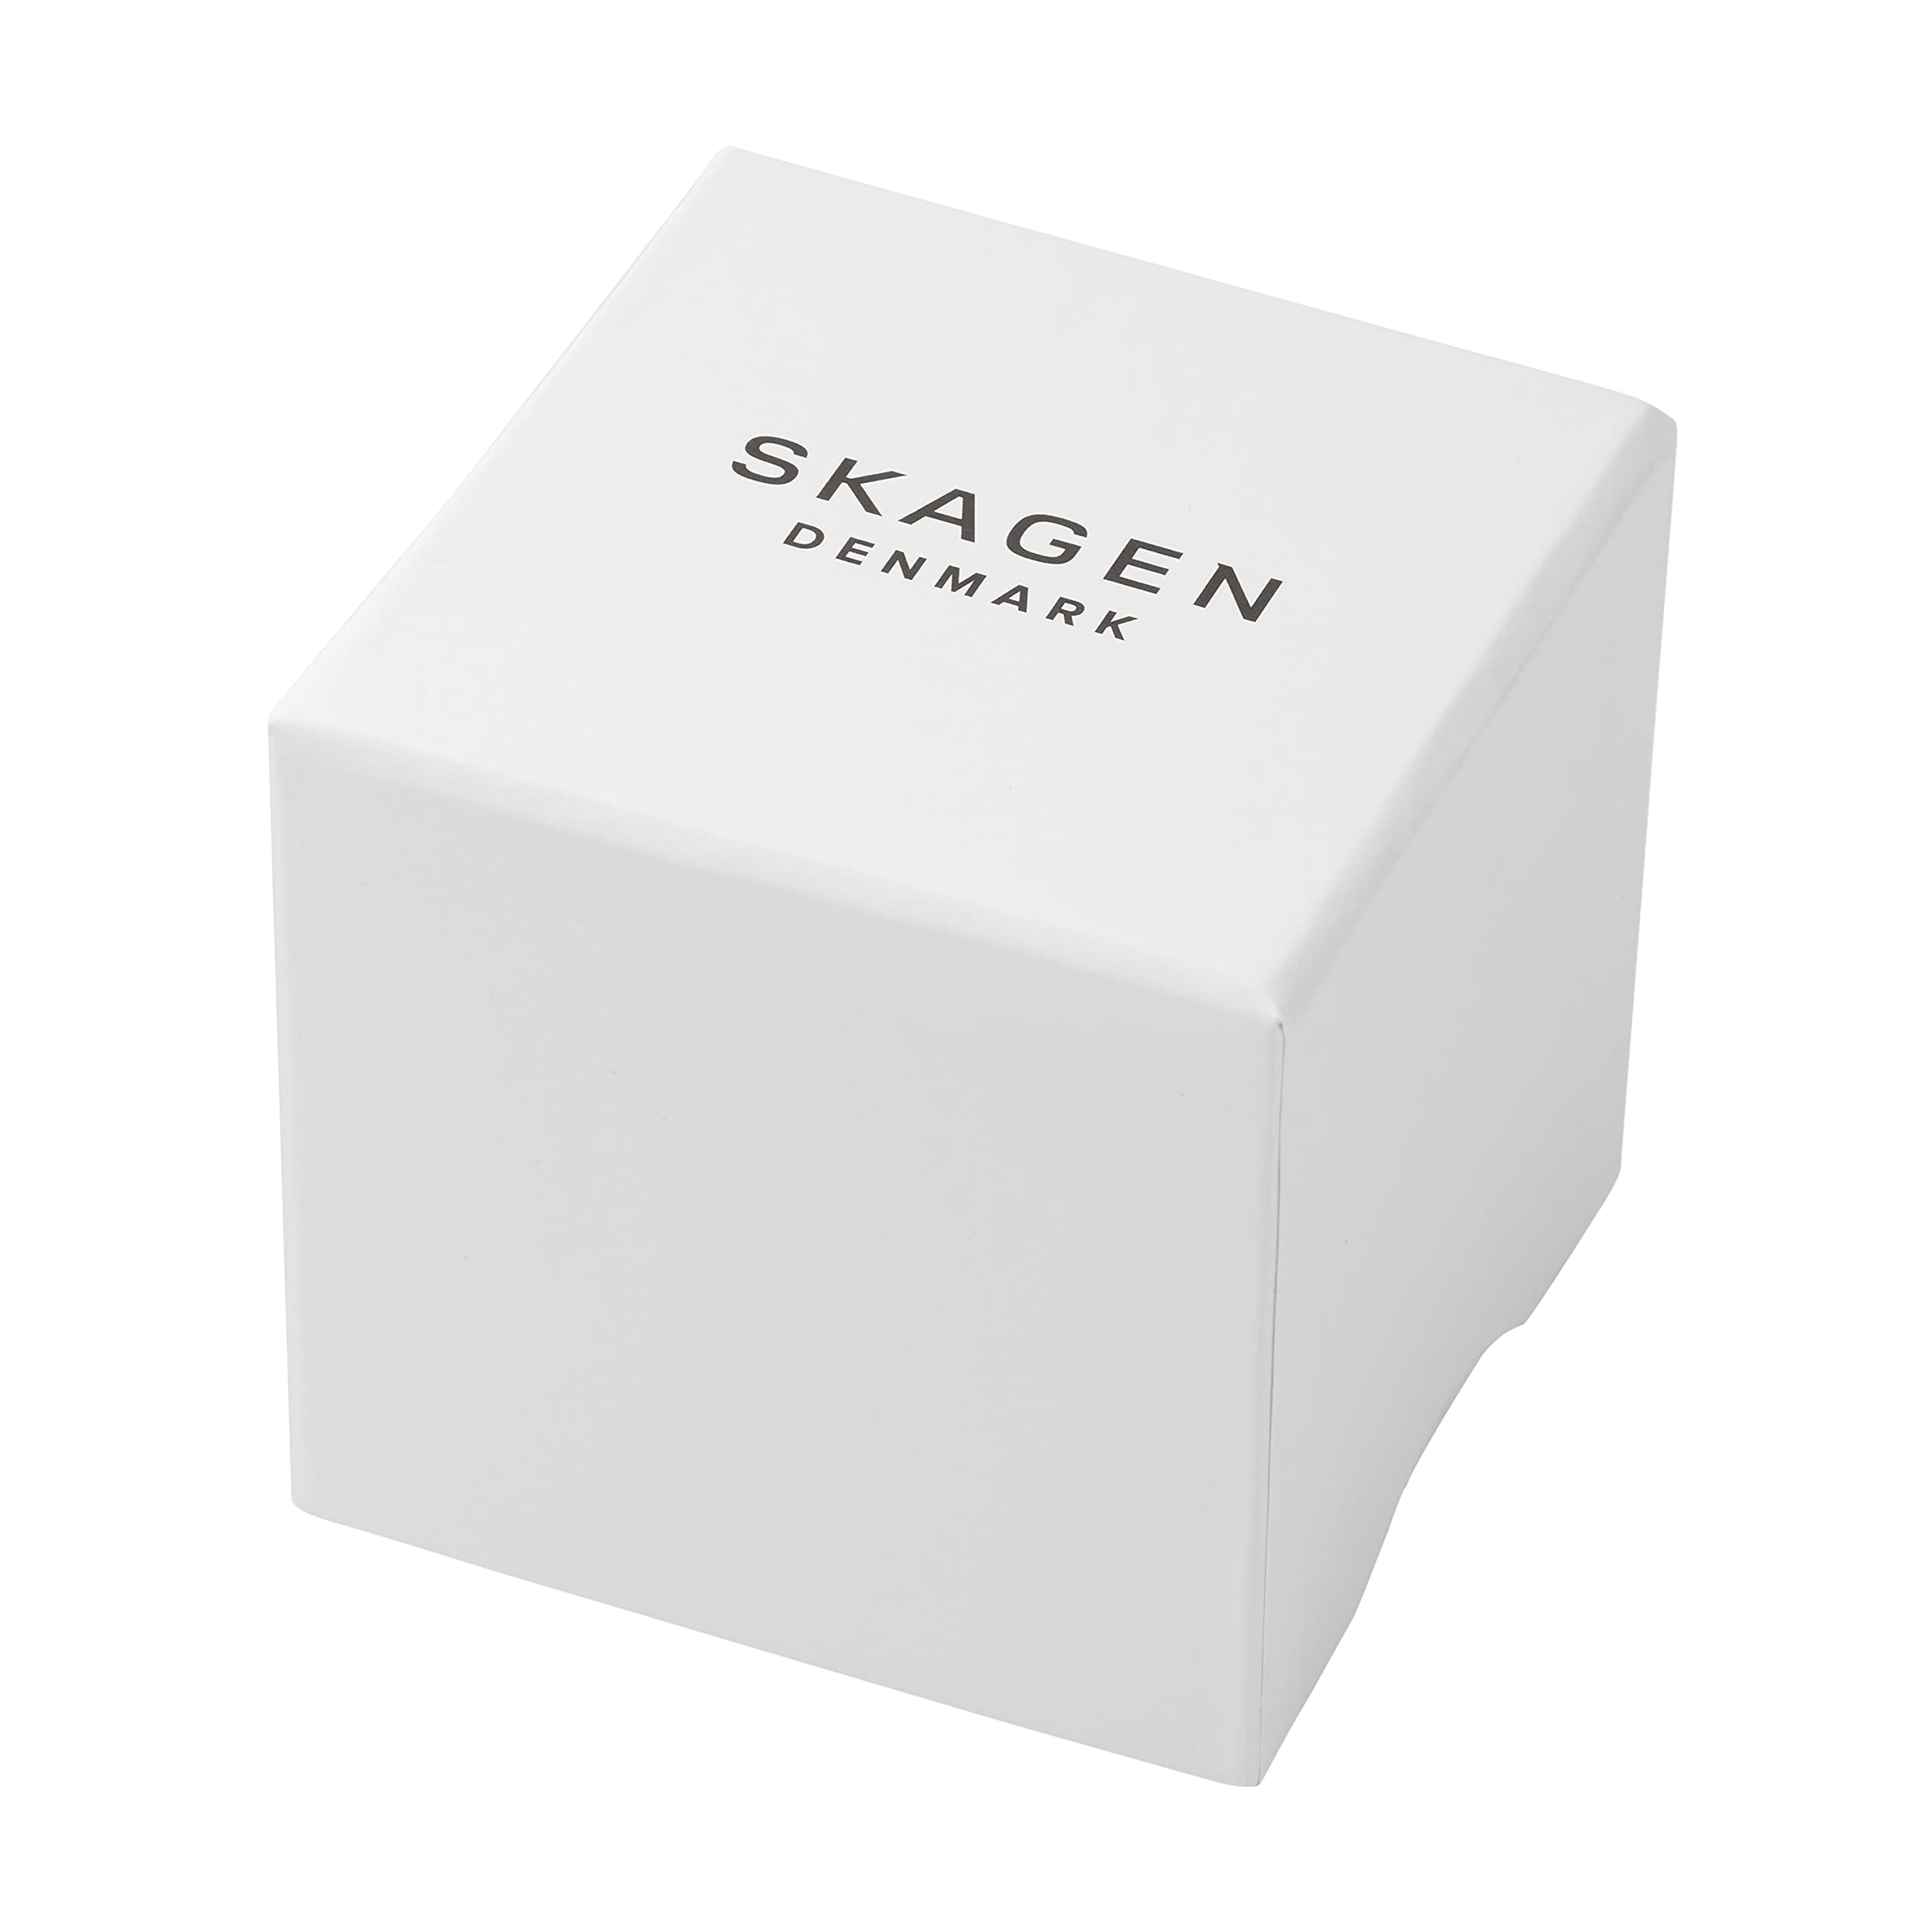 Skagen Men's Riis Minimalist Three-Hand Watch with Leather or Mesh Band